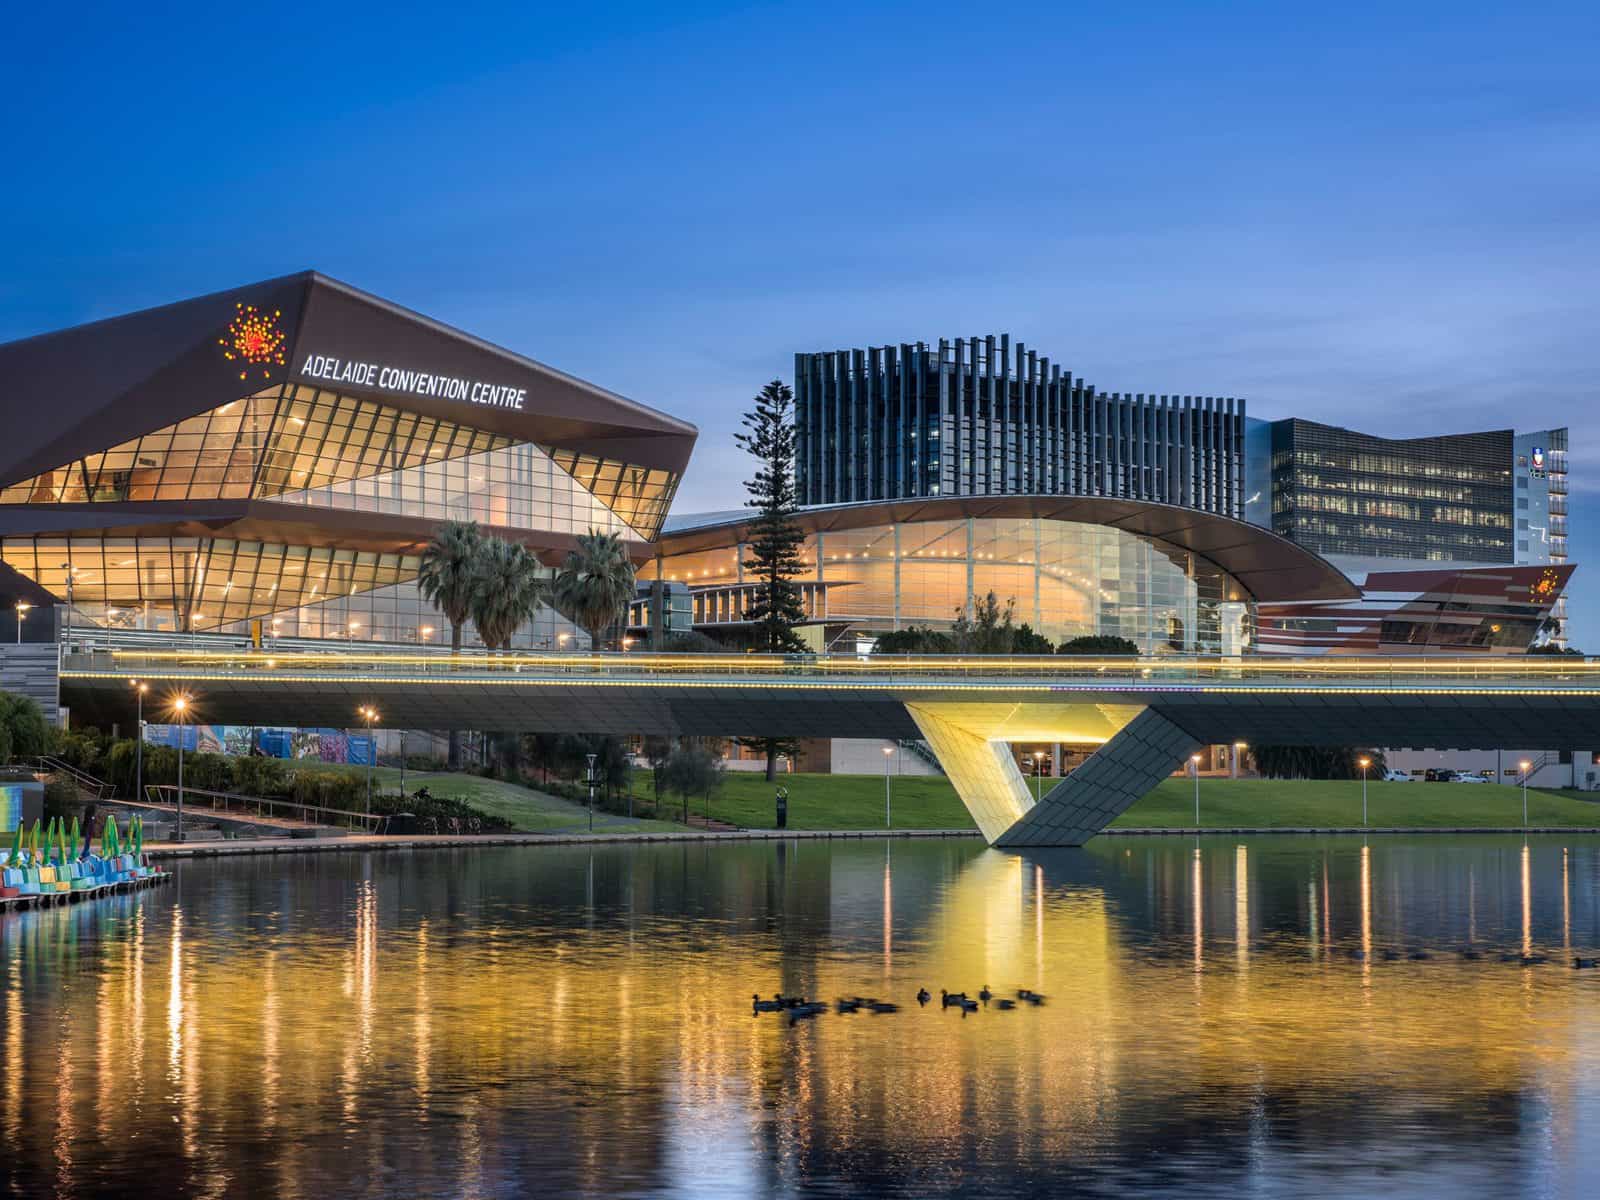 Looking across the River Torrens to the Adelaide Convention Centre at dusk.